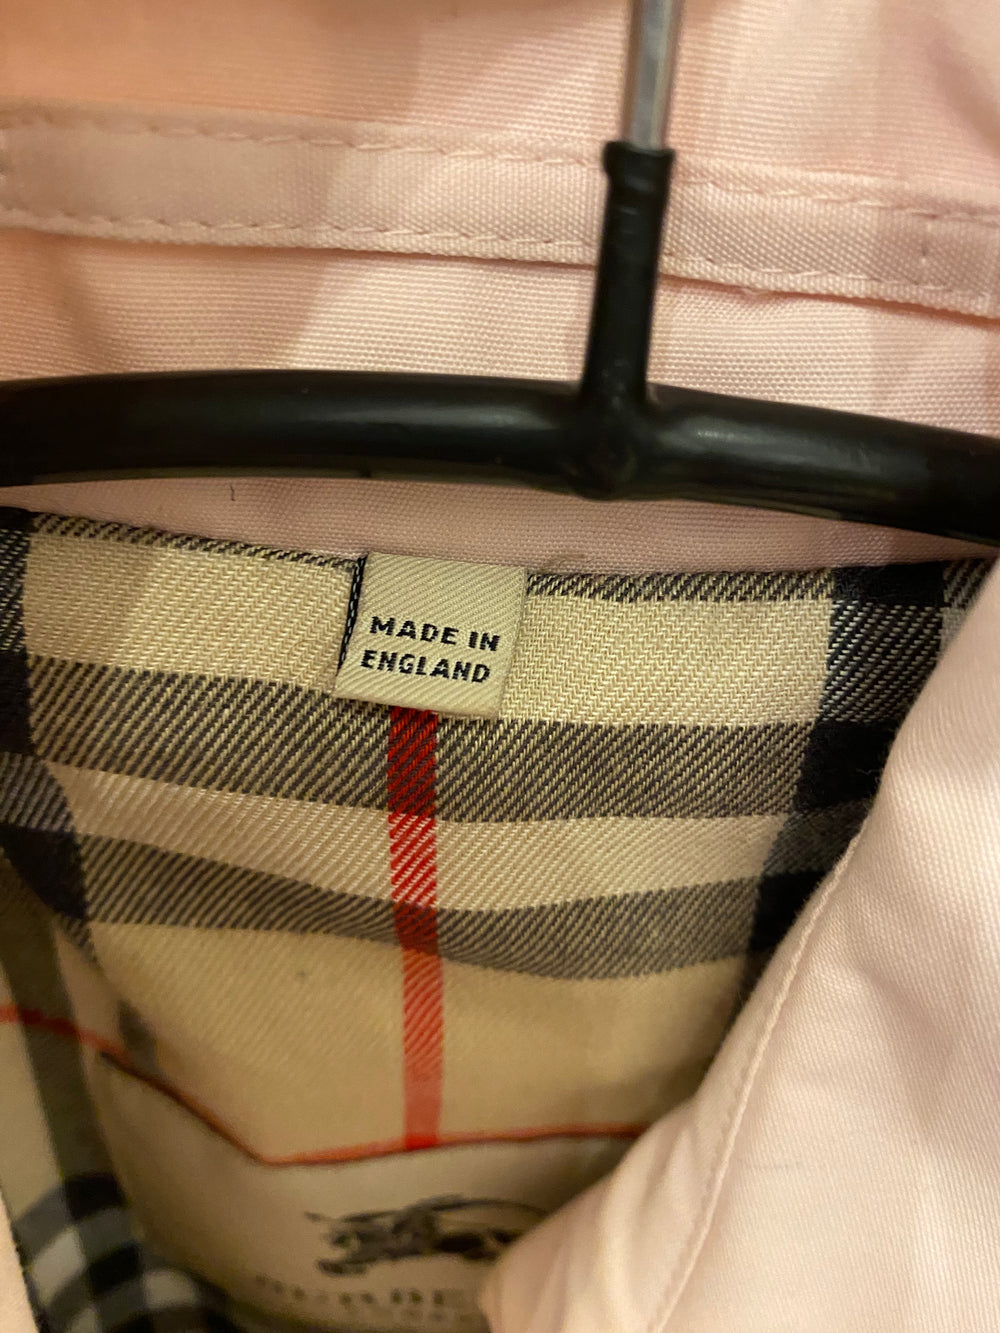 Burberry Pale Pink trench uk12 (excellent)